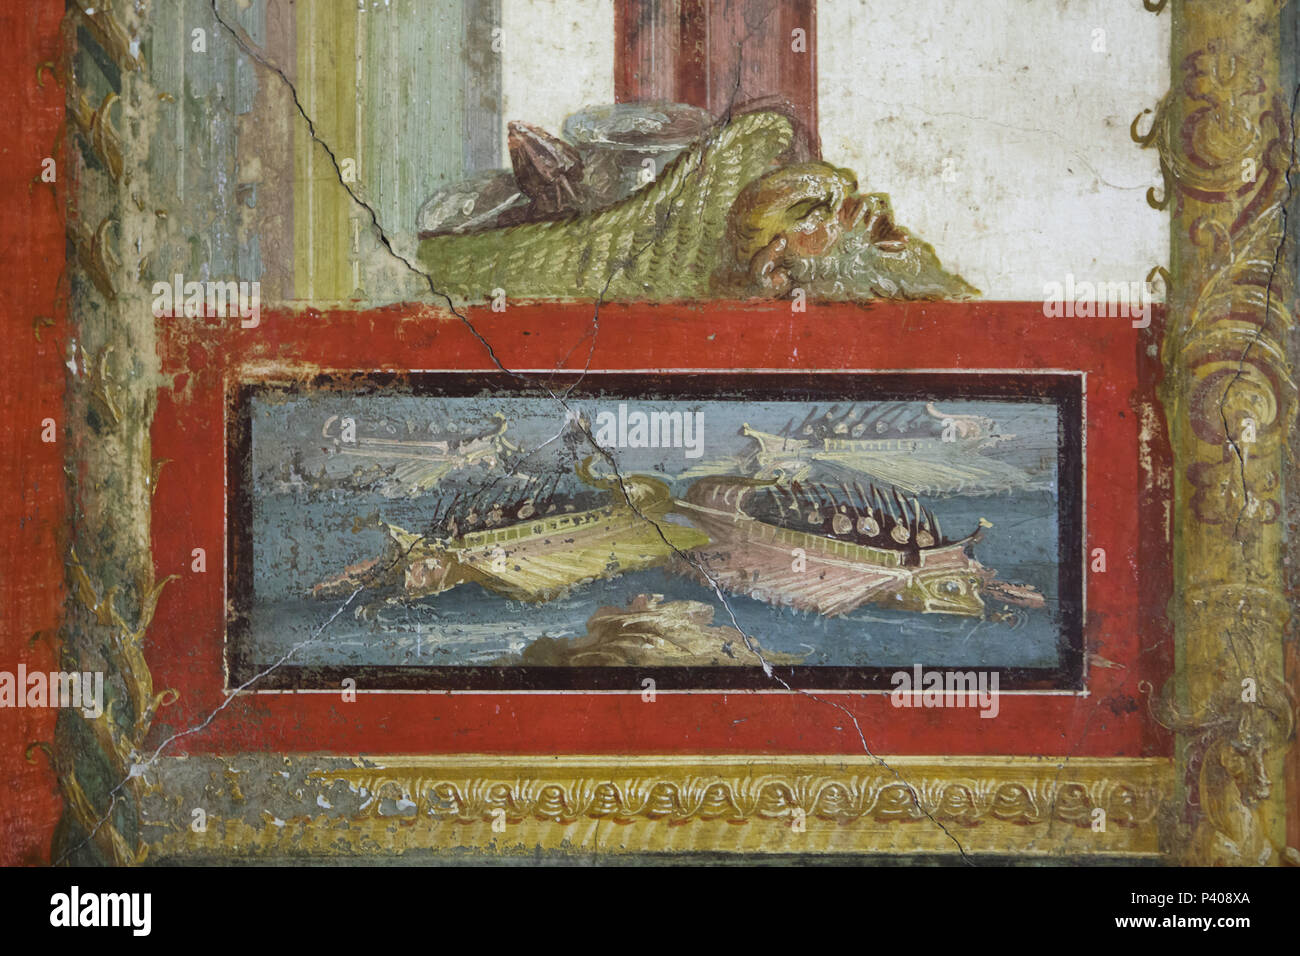 Naval scene depicted in the Roman fresco in the Ixion Room in the House of the Vettii (Casa dei Vettii) in the archaeological site of Pompeii (Pompei) near Naples, Campania, Italy. Stock Photo